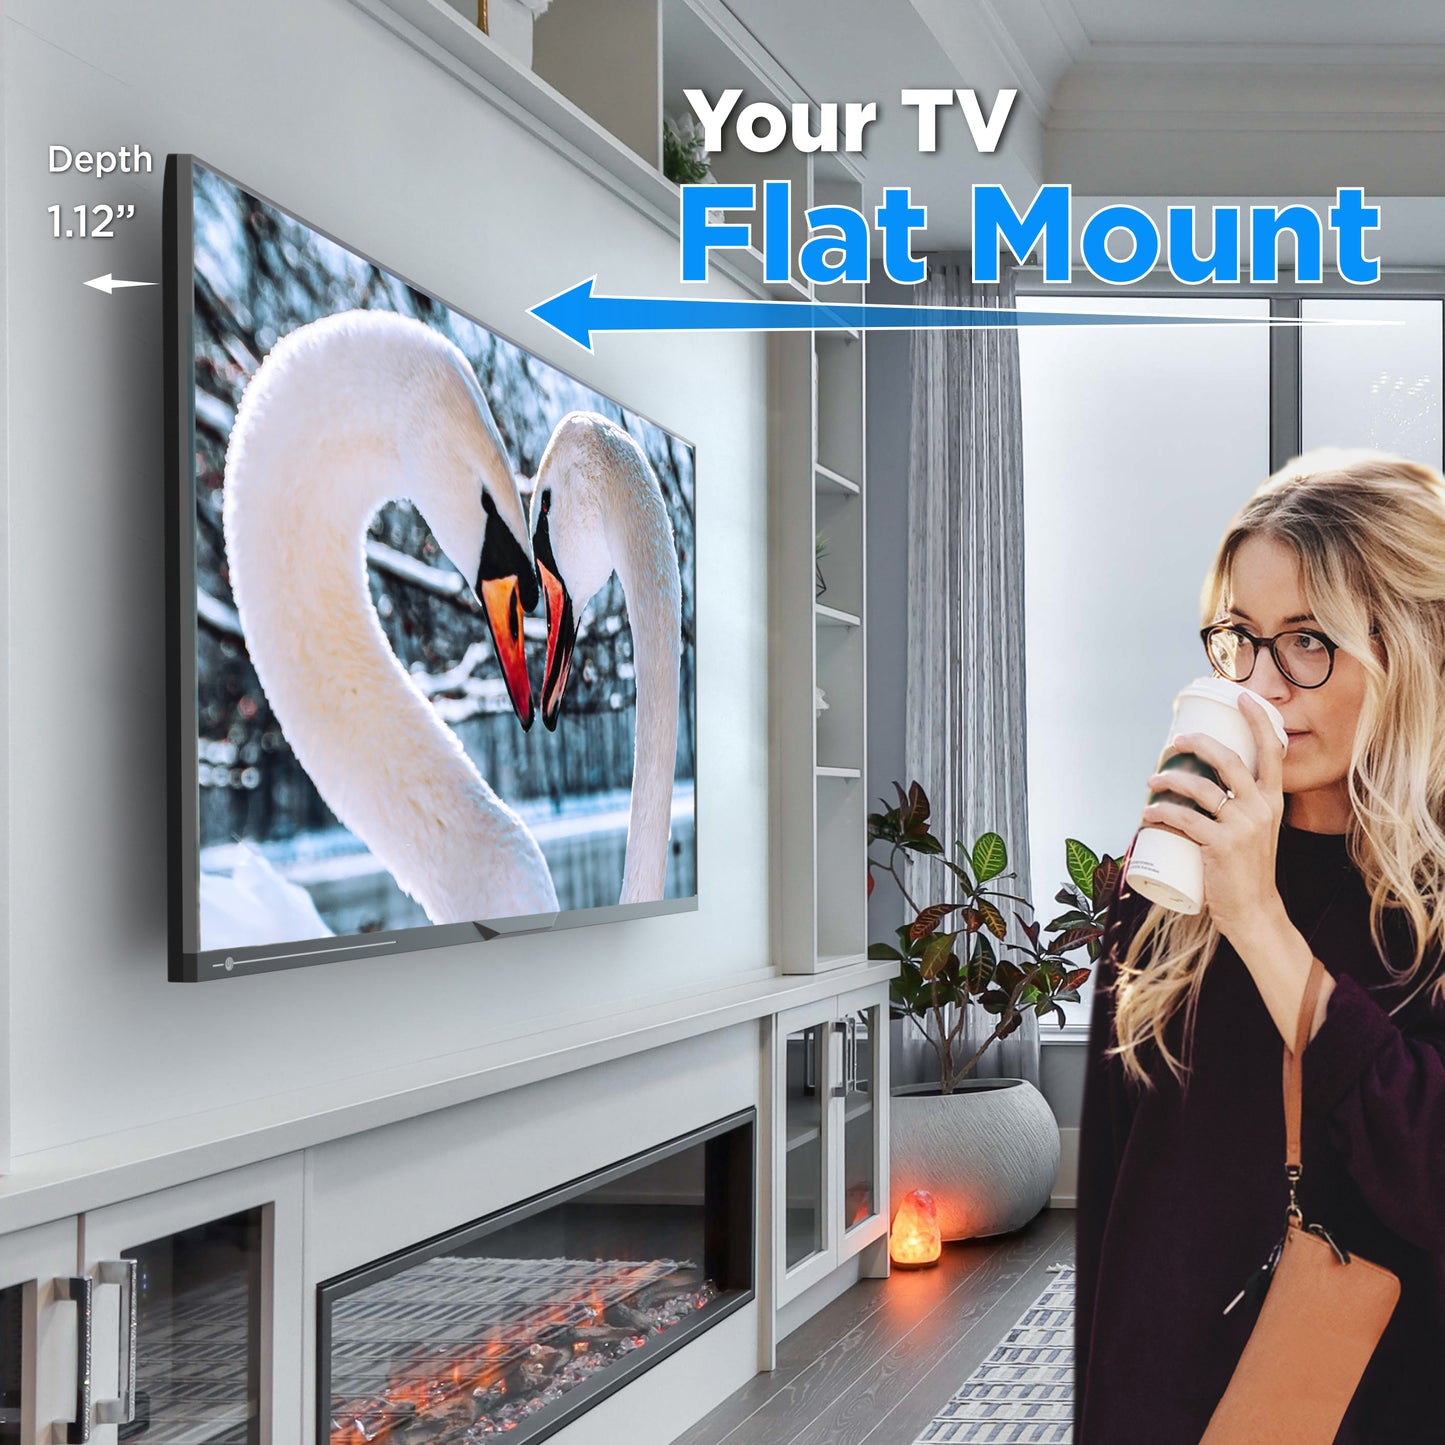 ProMounts Flat / Fixed TV Wall Mount for 42" to 80" TVs, holds up to 143 lbs.(MF642)